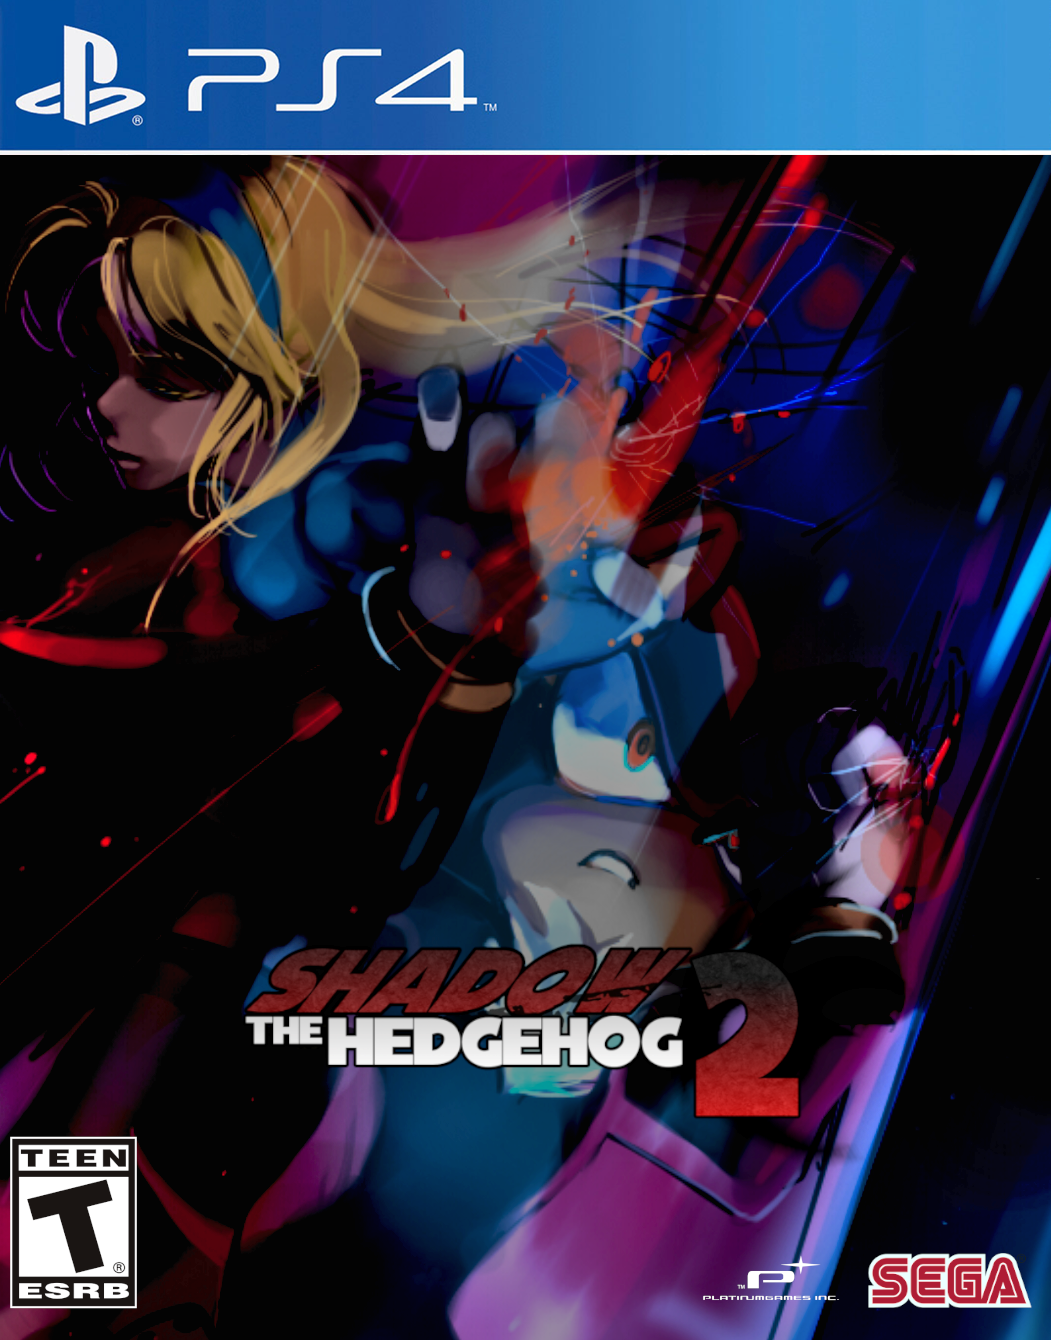 Sonic:Shadow The Hedgehog 2 and Silver The Hedgehog Future game poster#1 :  r/SonicTheHedgehog